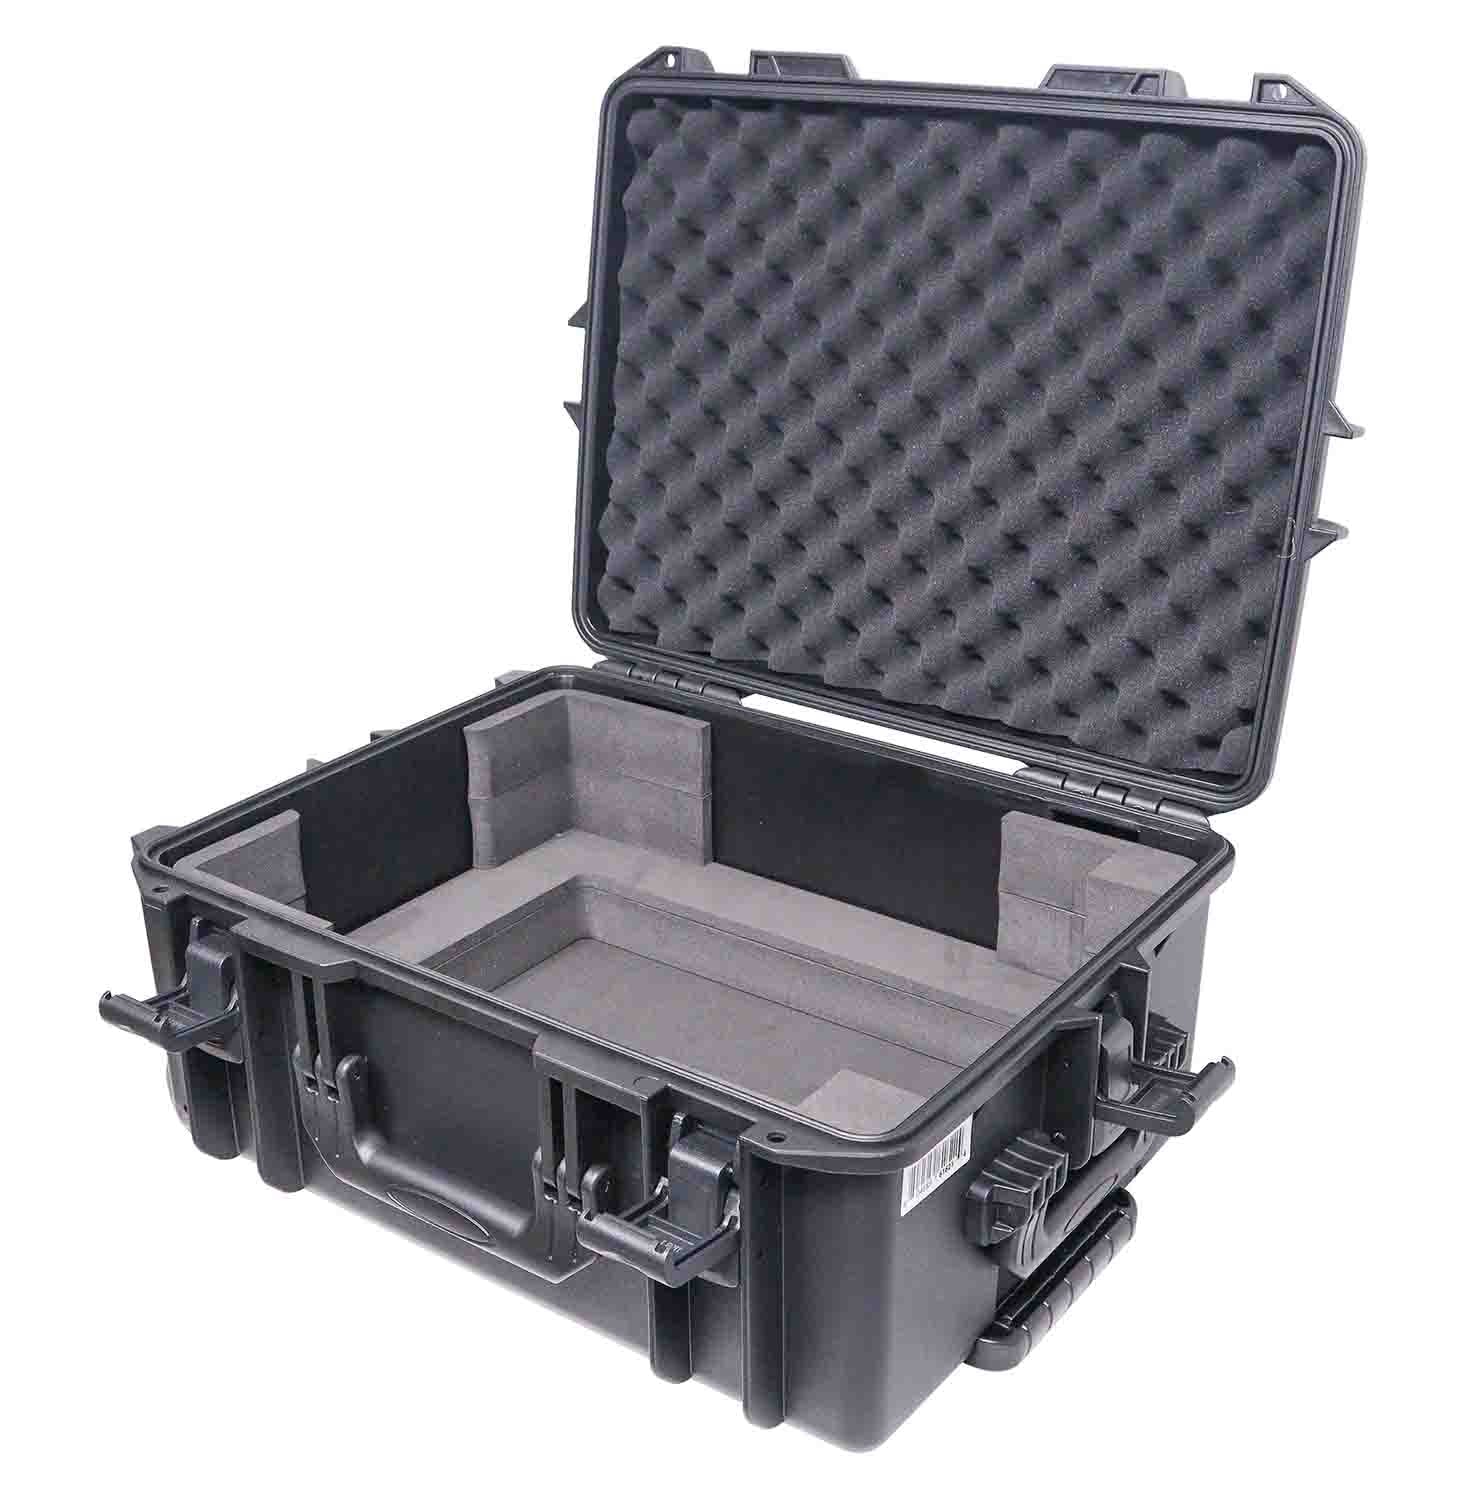 ProX XM-CDHW UltronX Watertight Case Holds CDJ-3000 and 12 Inch Mixers with Handle and Wheels - Hollywood DJ